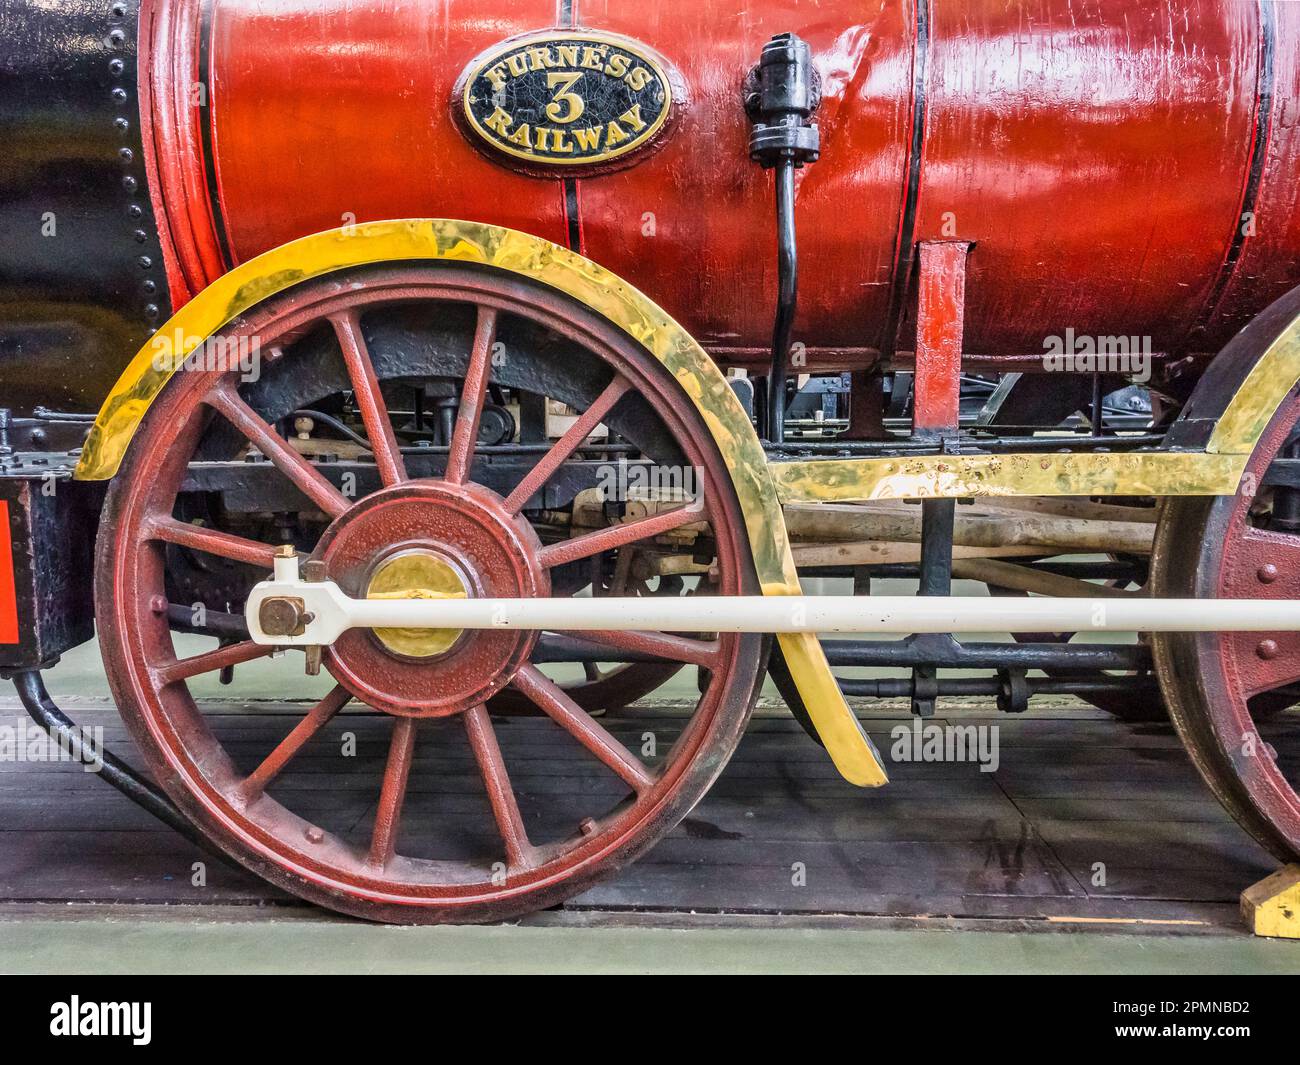 General image inside the National Railway Museum in York seen here featuring the Furness railways Copper Knob locomotive Stock Photo